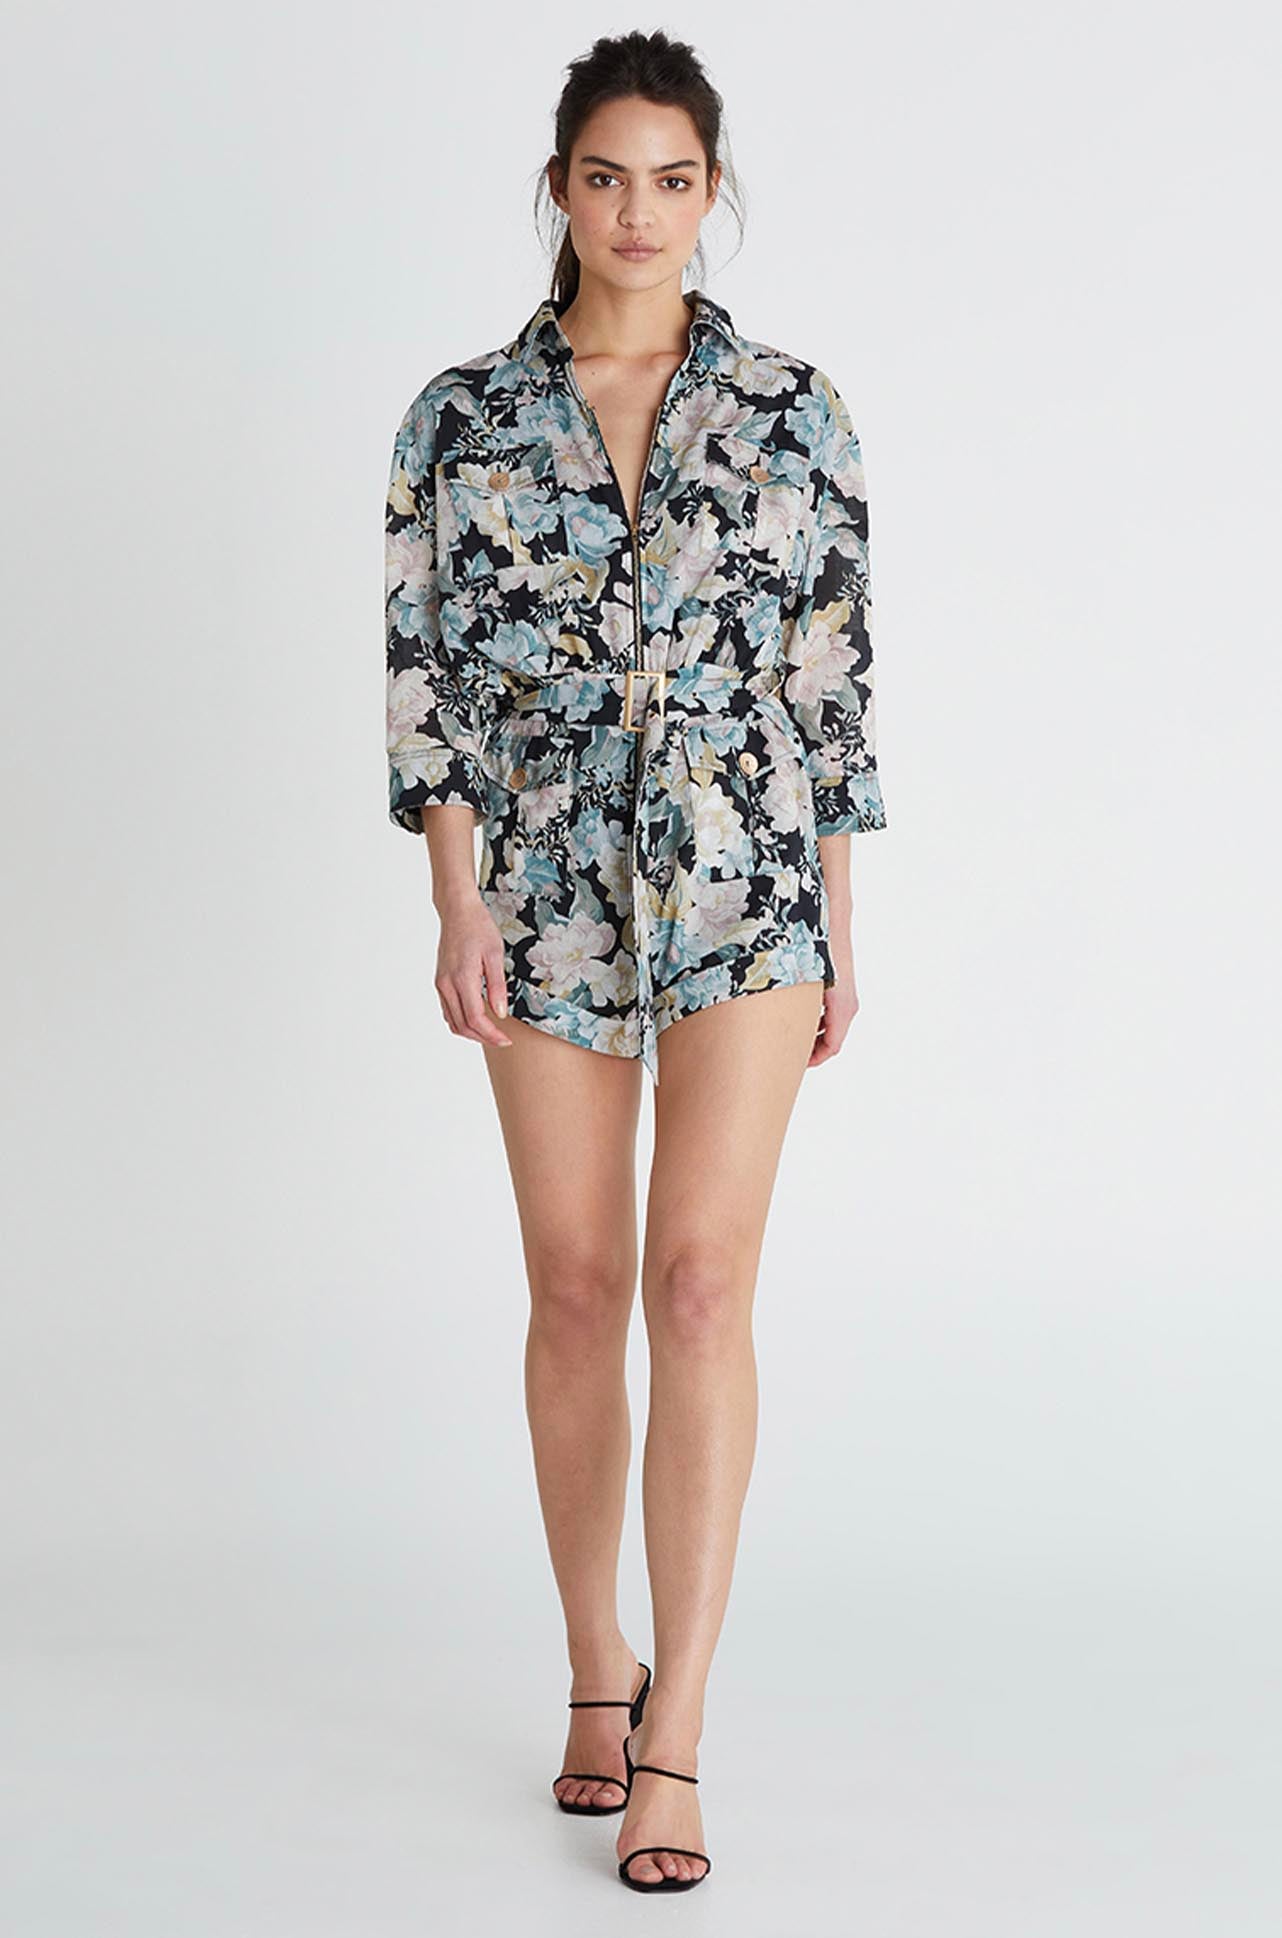 We Are Kindred - Talulah Playsuit in Noir Blossom